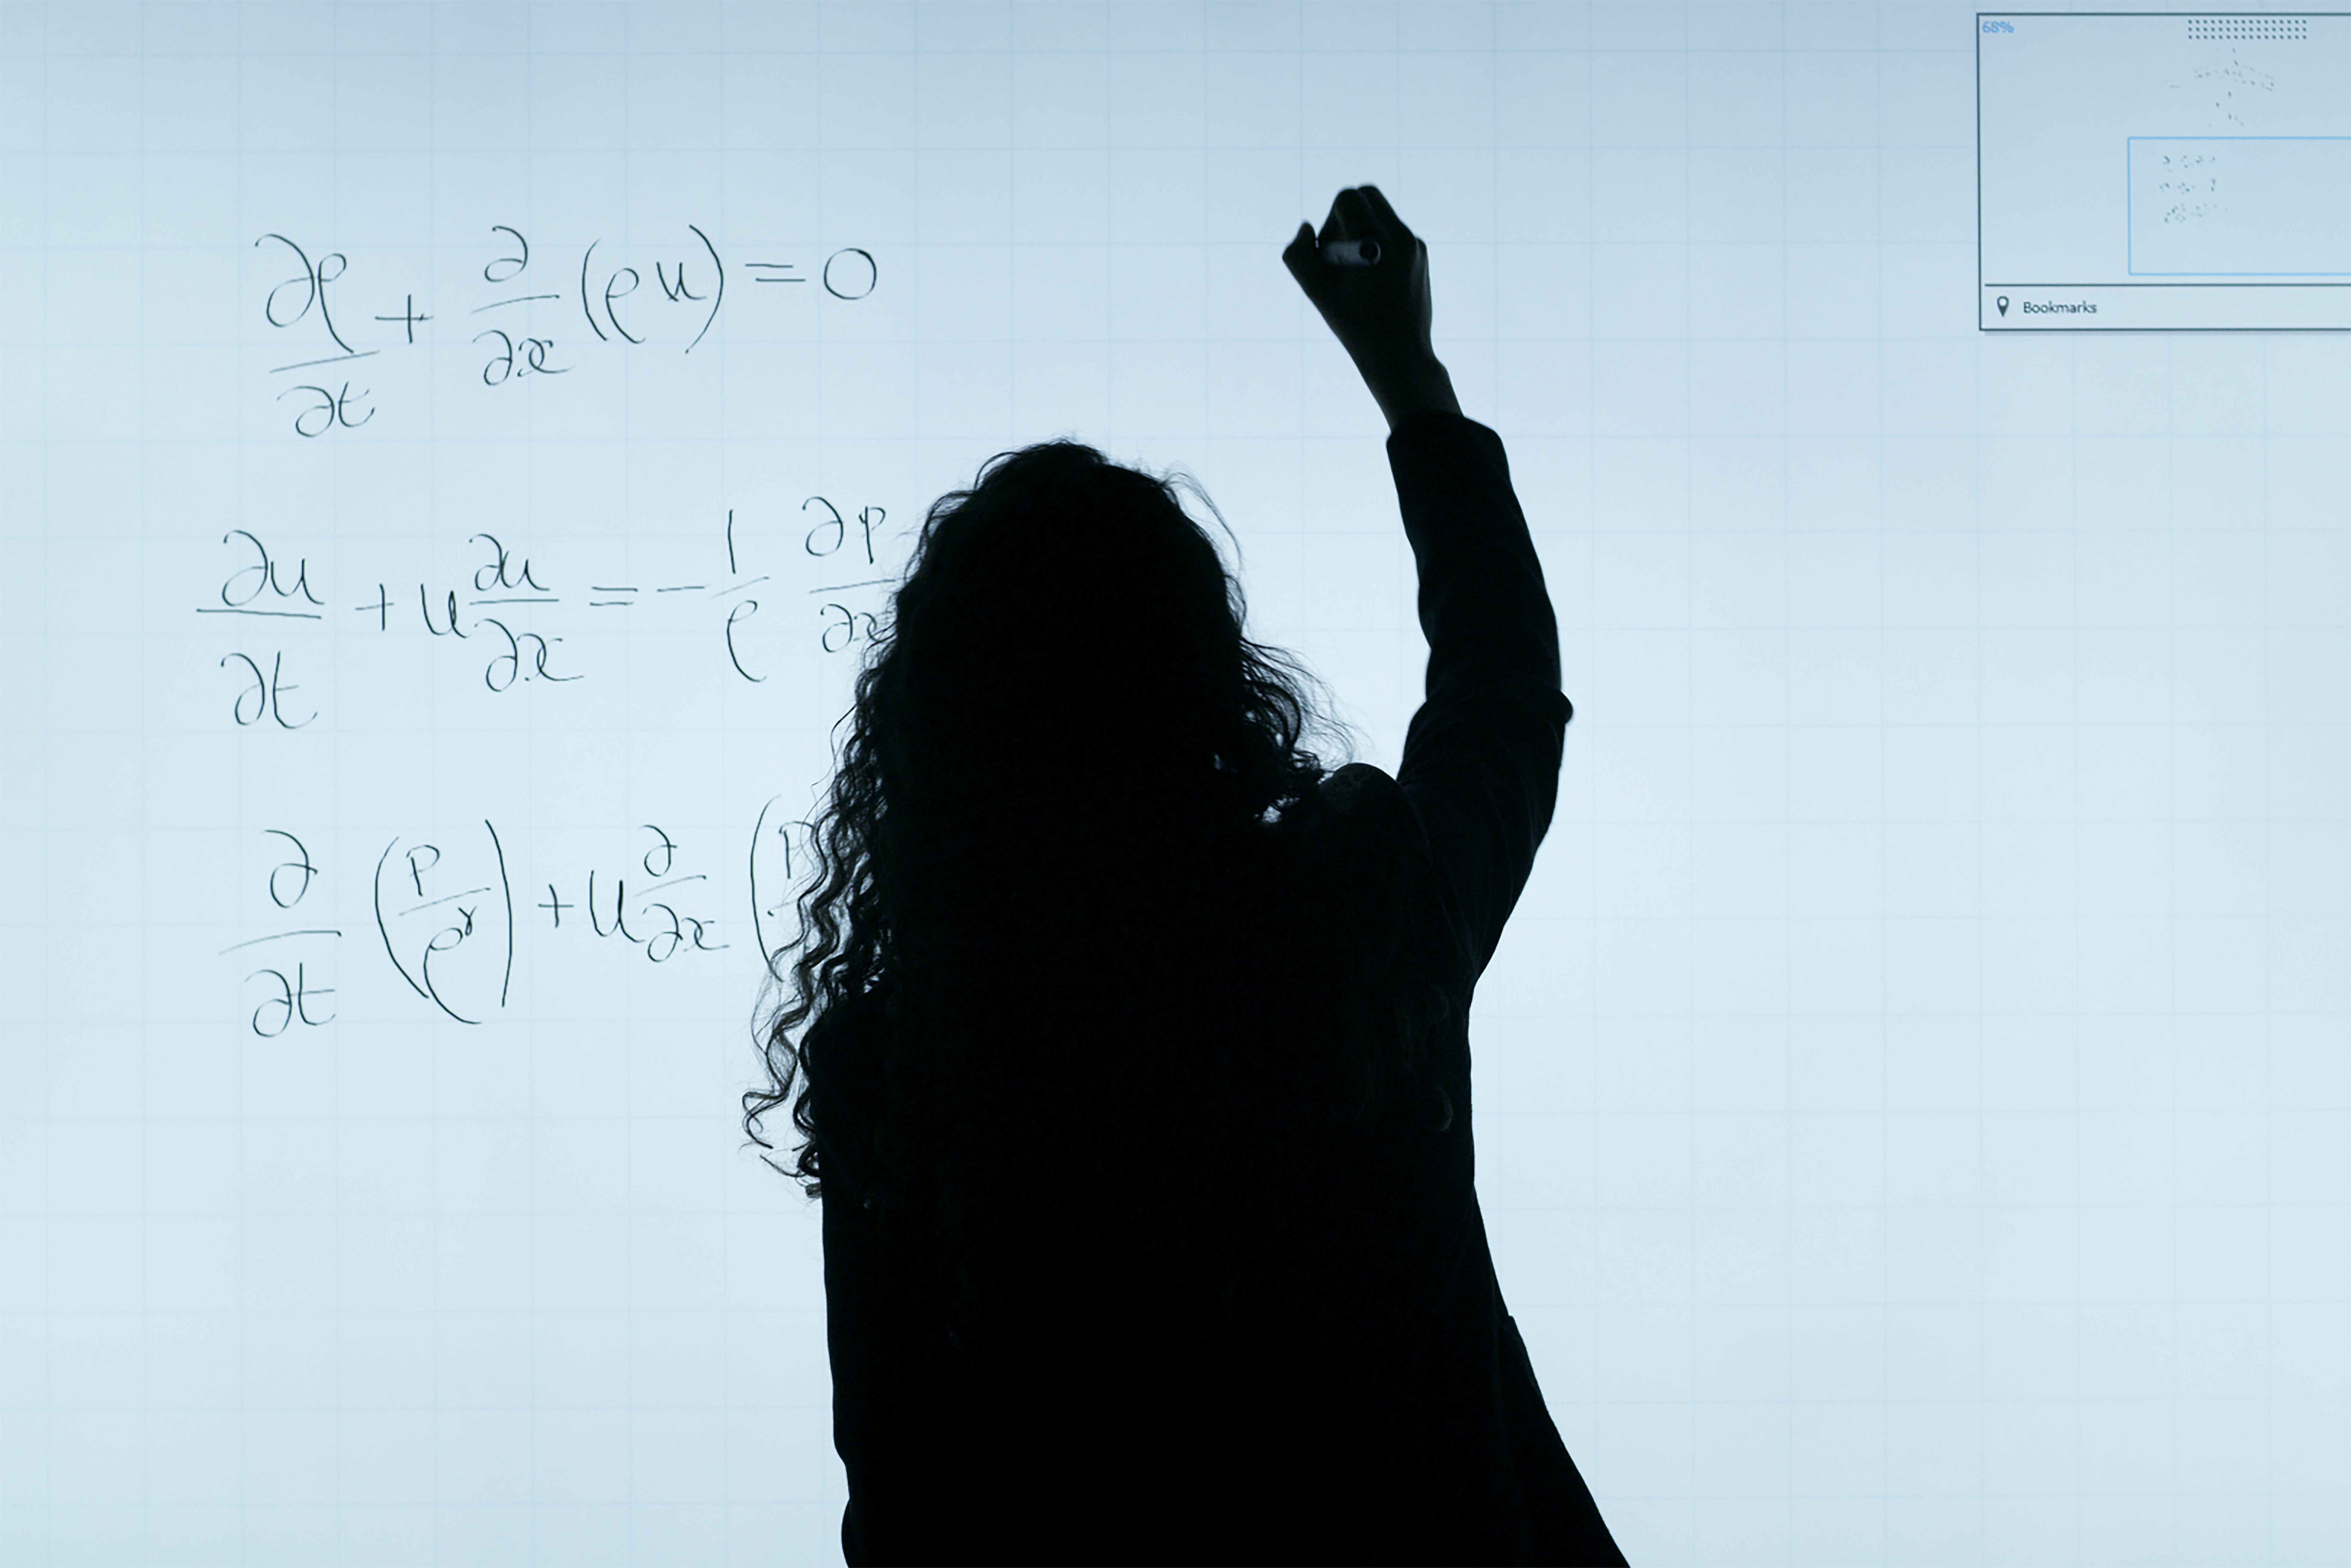 This image appears to be writing some mathematics formulas on a large digital screen.